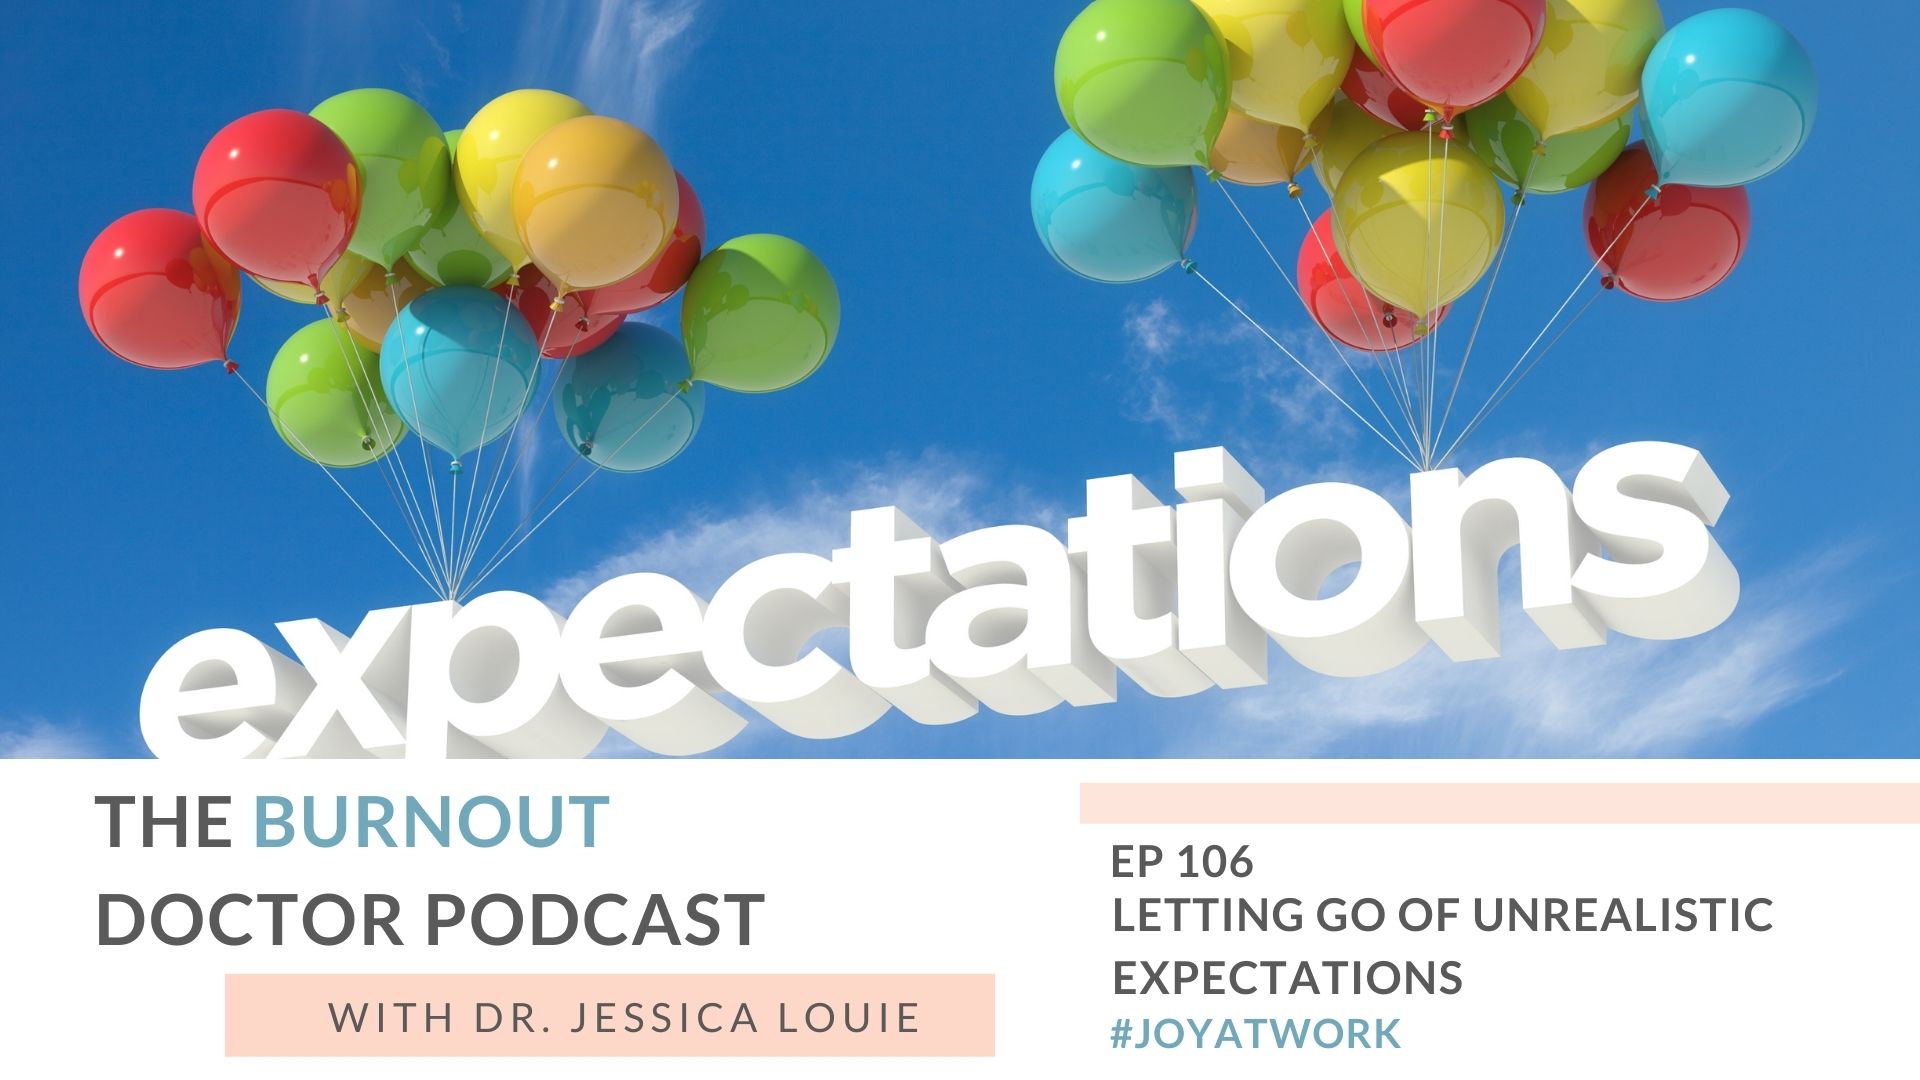 Letting go of unrealistic expectations. how to let go of unrealistic expectations. Pharmacist burnout coaching, how to prevent pharmacist burnout, healthcare burnout keynote speaker, simplifying keynote speaker. Dr. Jessica Louie. The Burnout Doctor Podcast